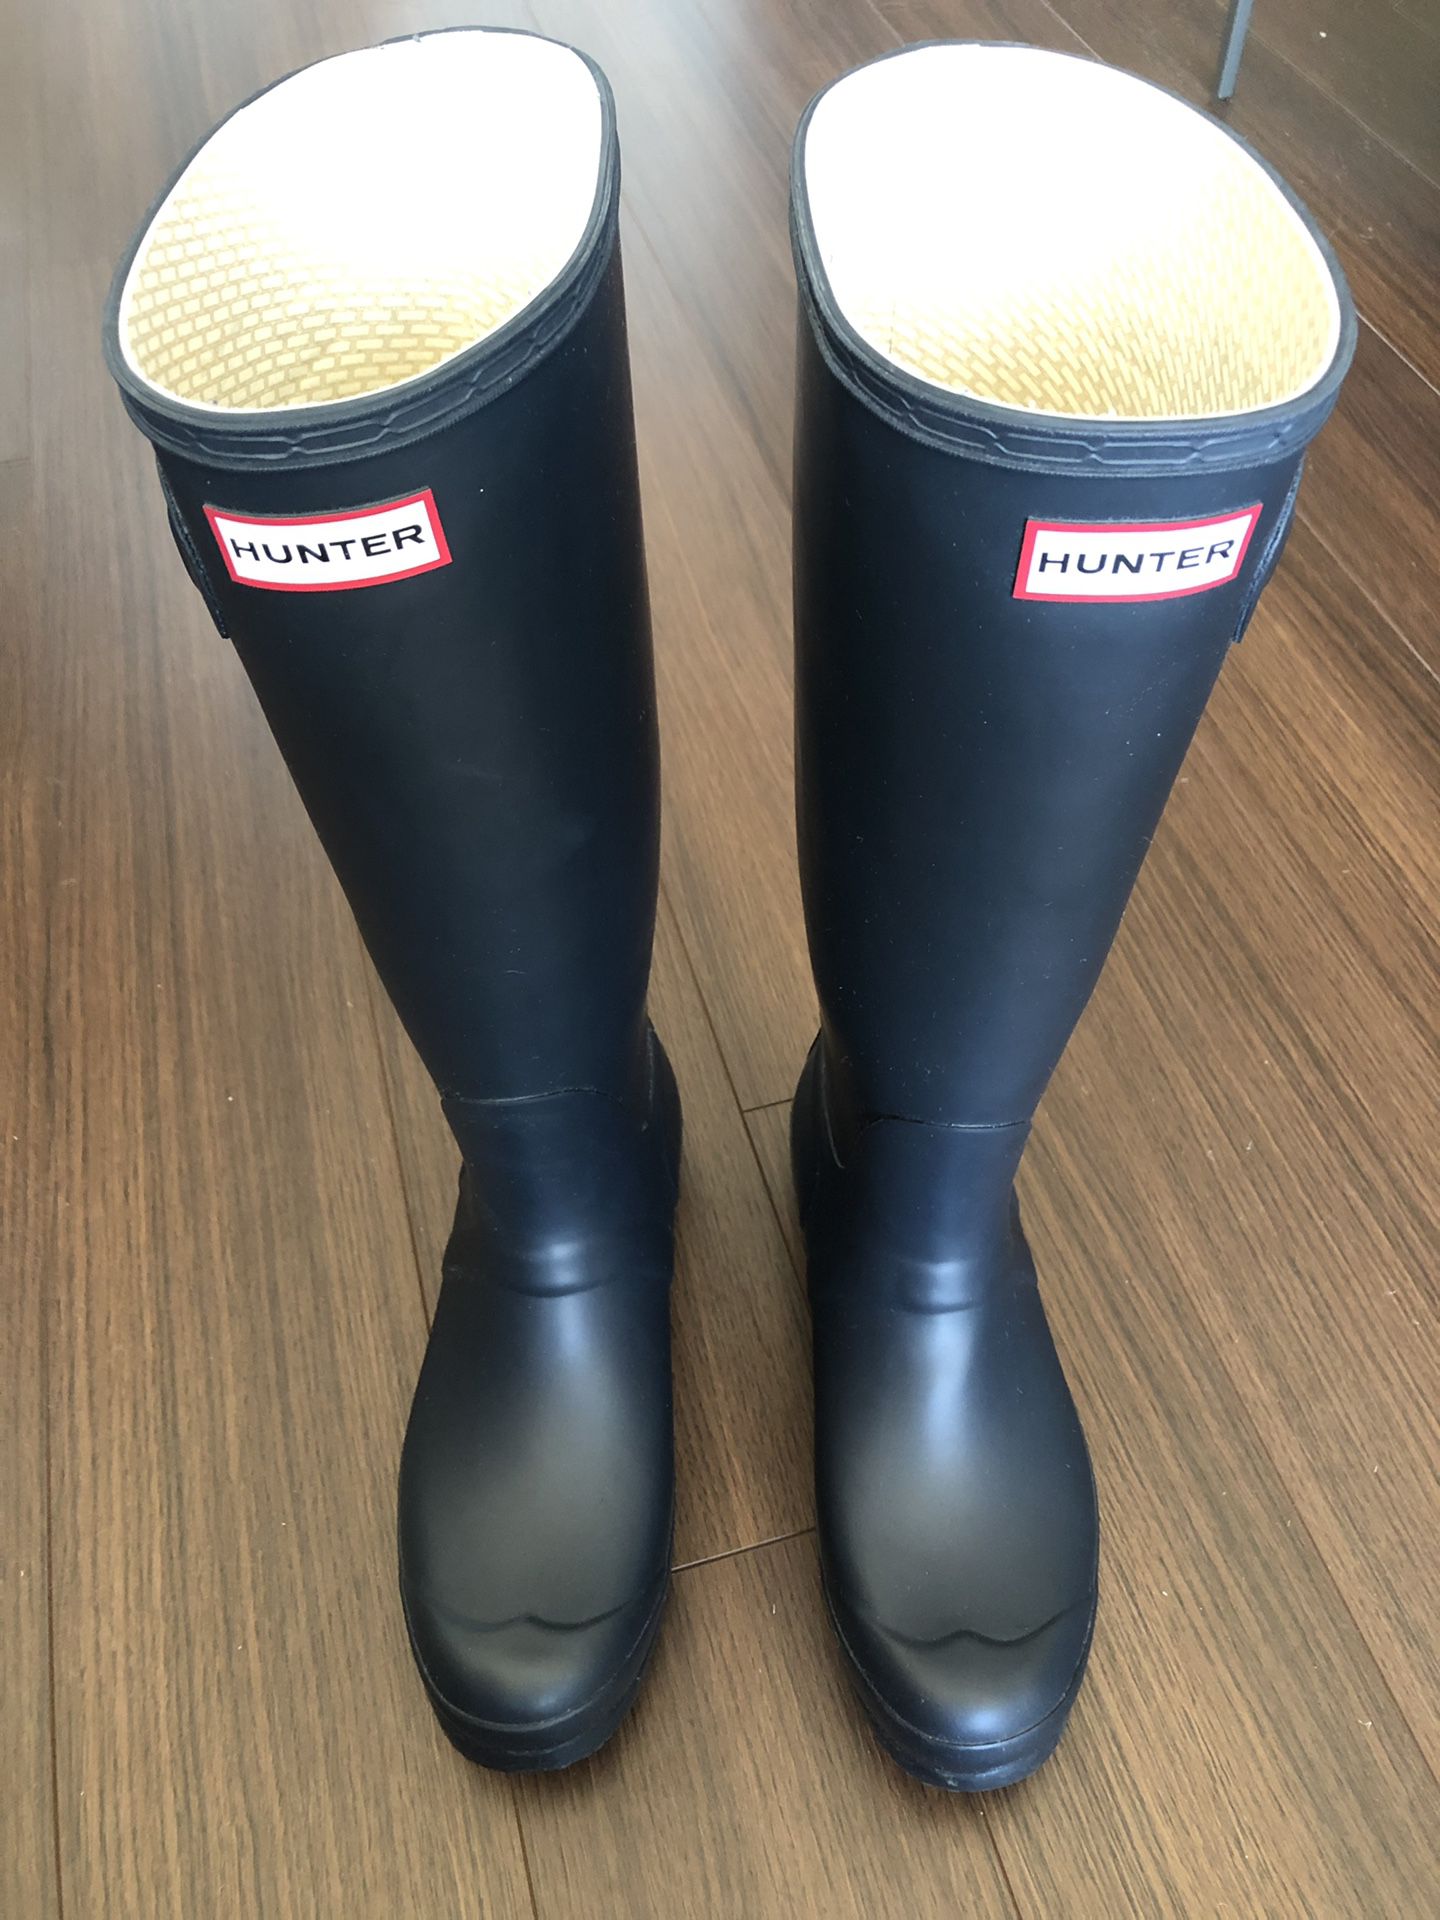 Hunter boots in navy